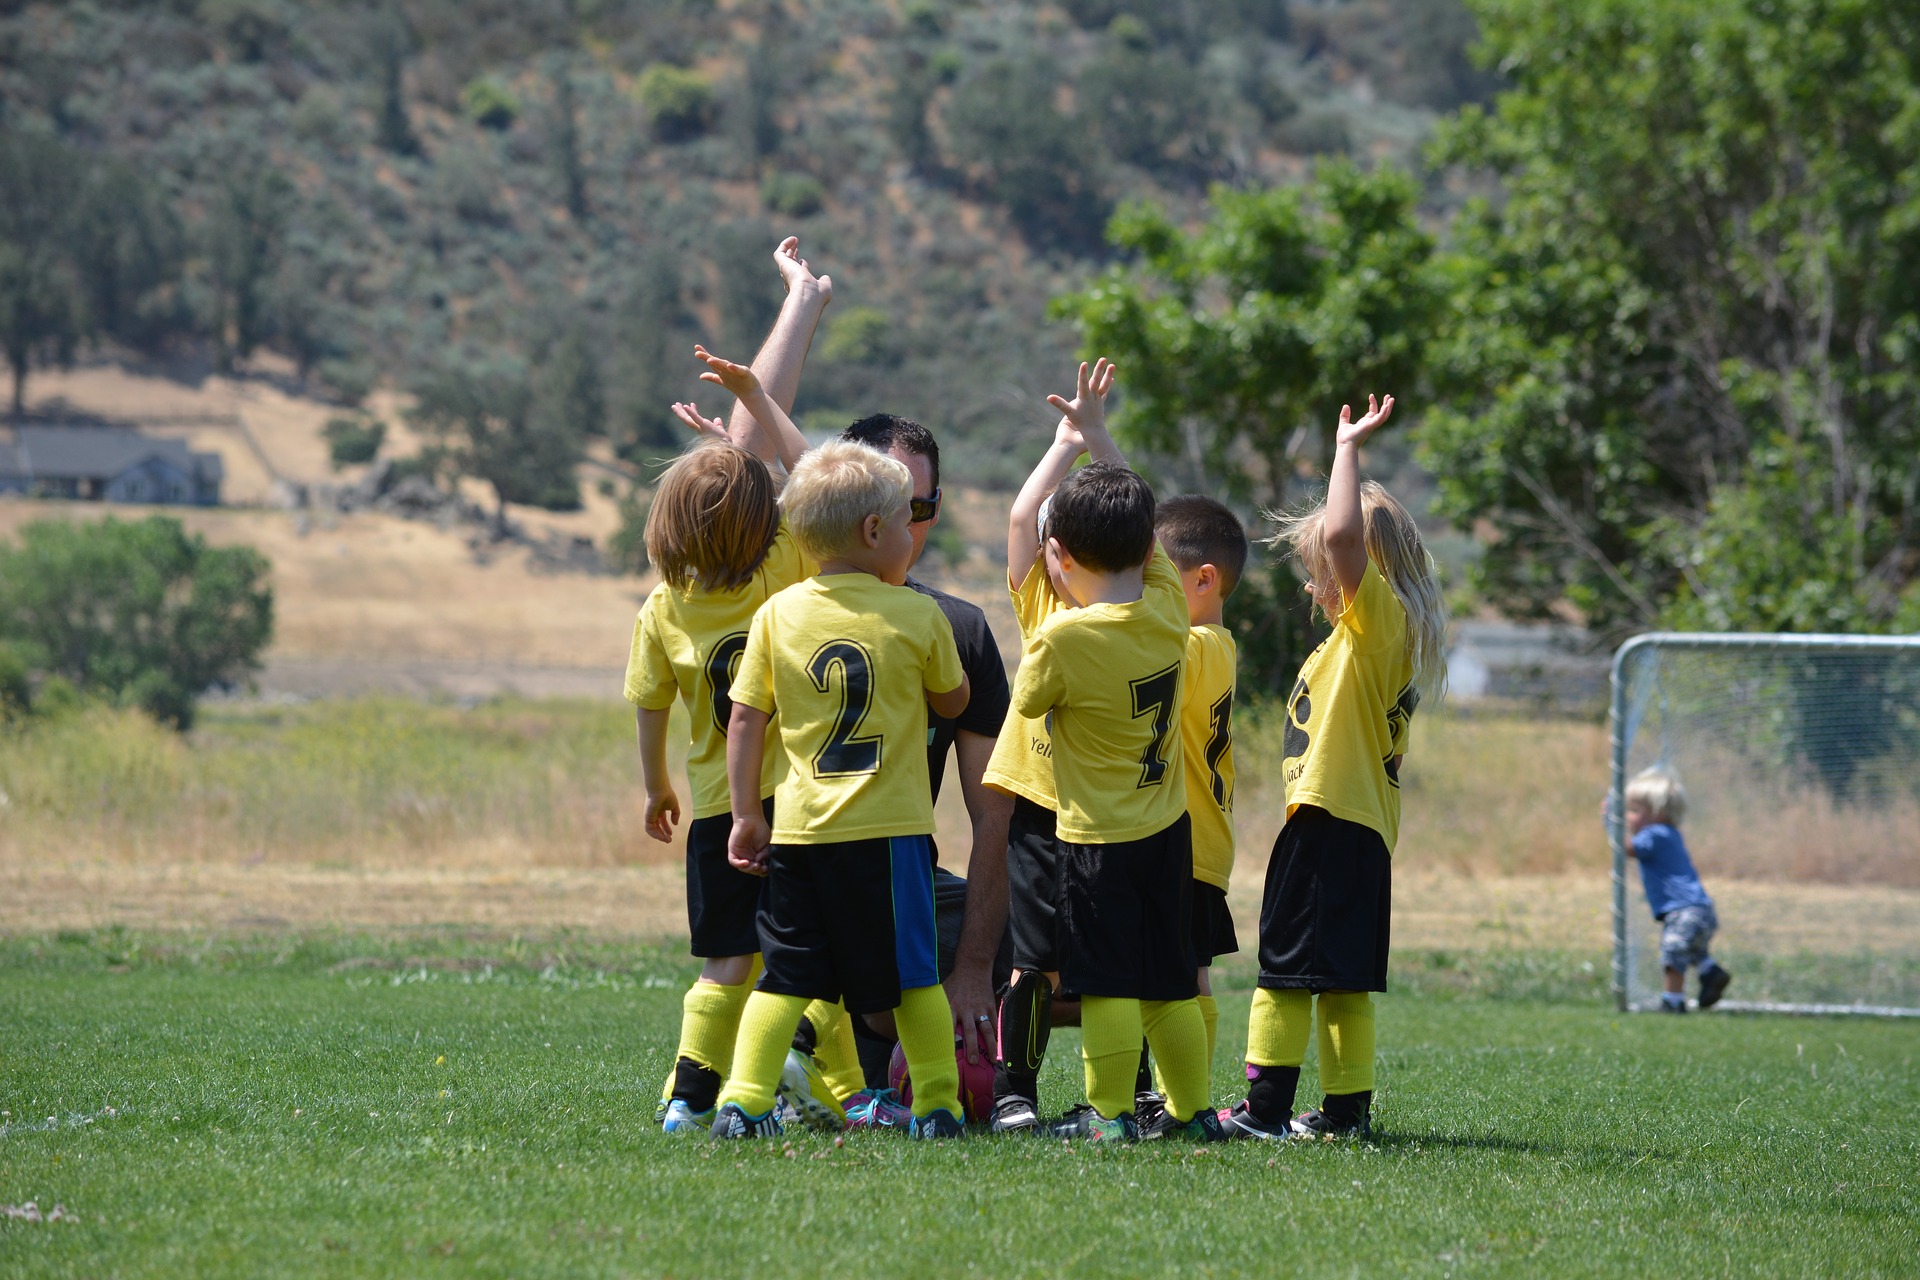 Youth soccer team having a great time outside after winning.